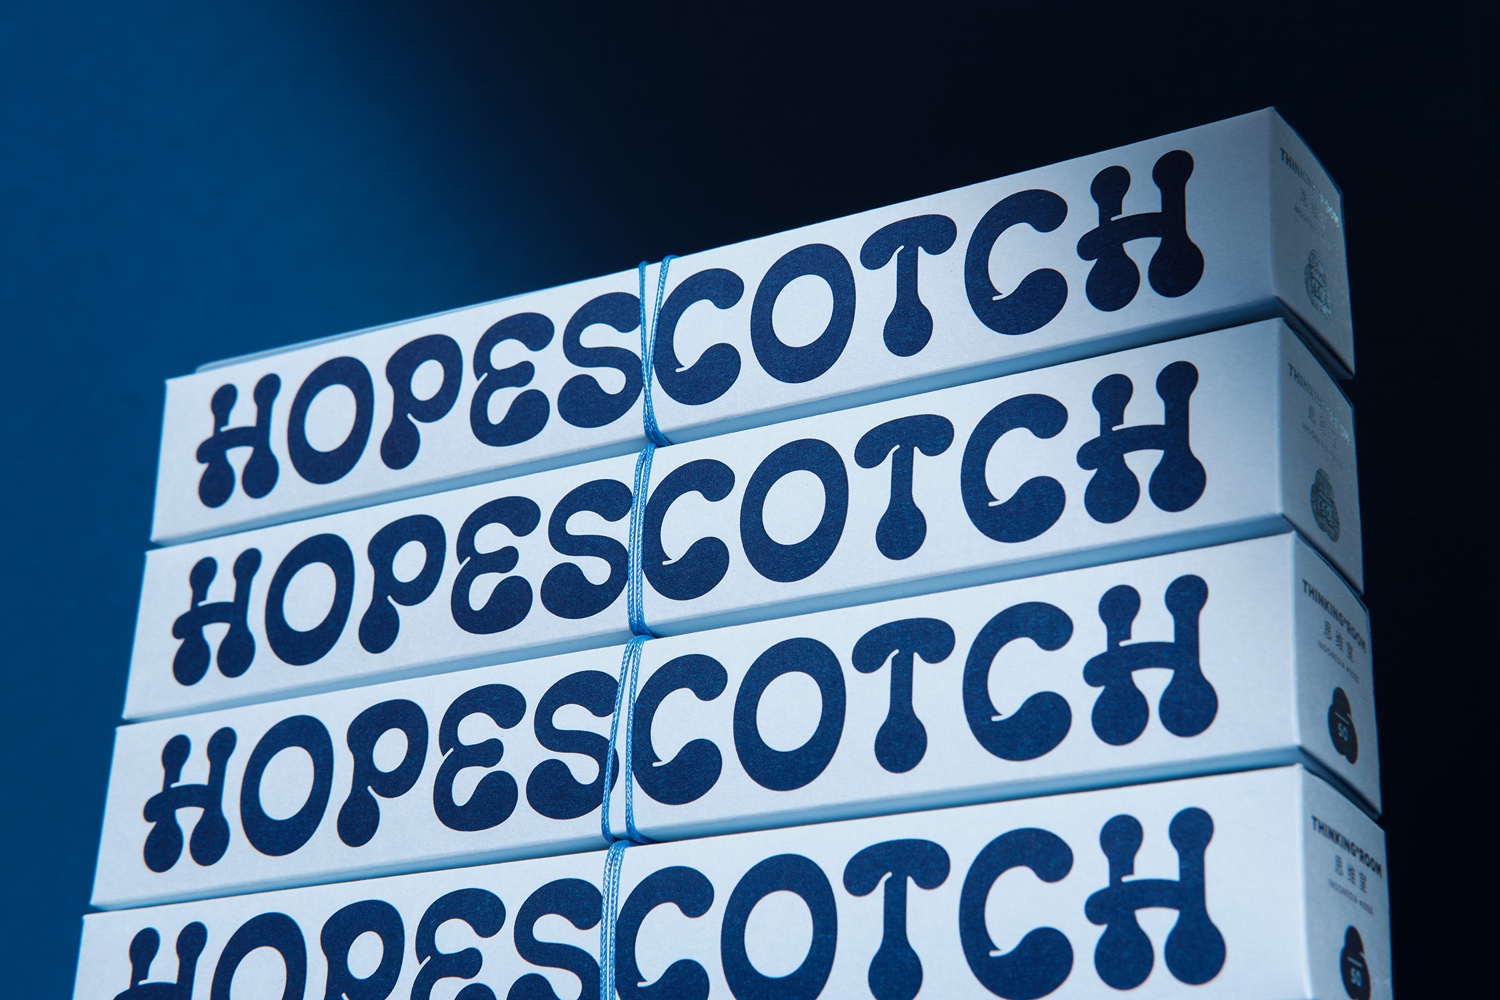 Hopescotch Finds The Balance Between Maturity And Innocent Youthfulness